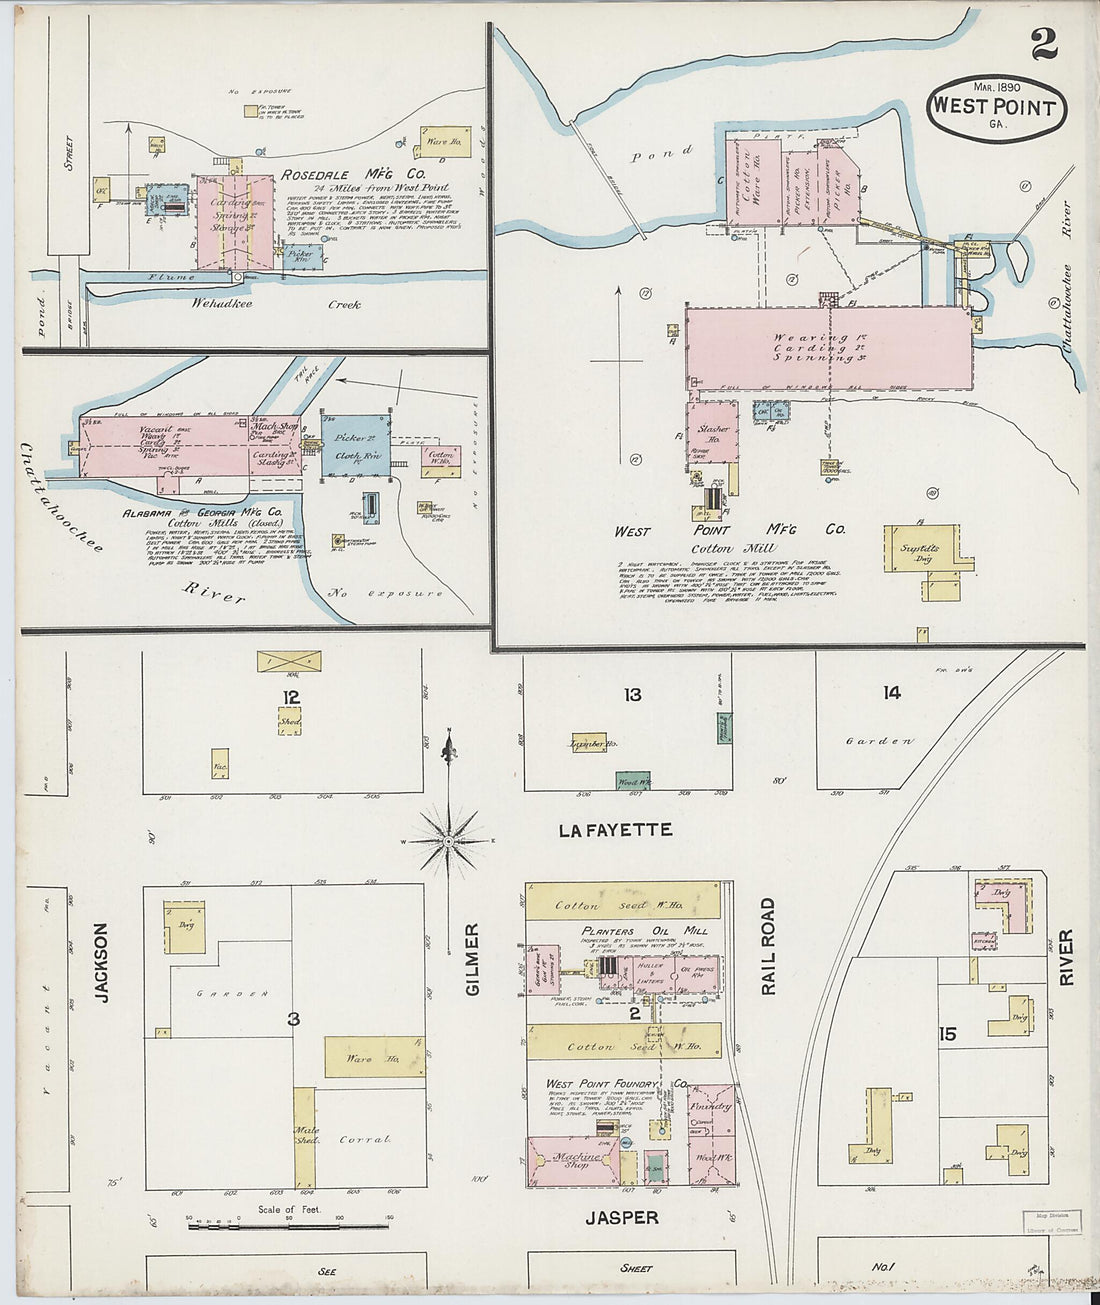 This old map of West Point, Troup County, Georgia was created by Sanborn Map Company in 1890